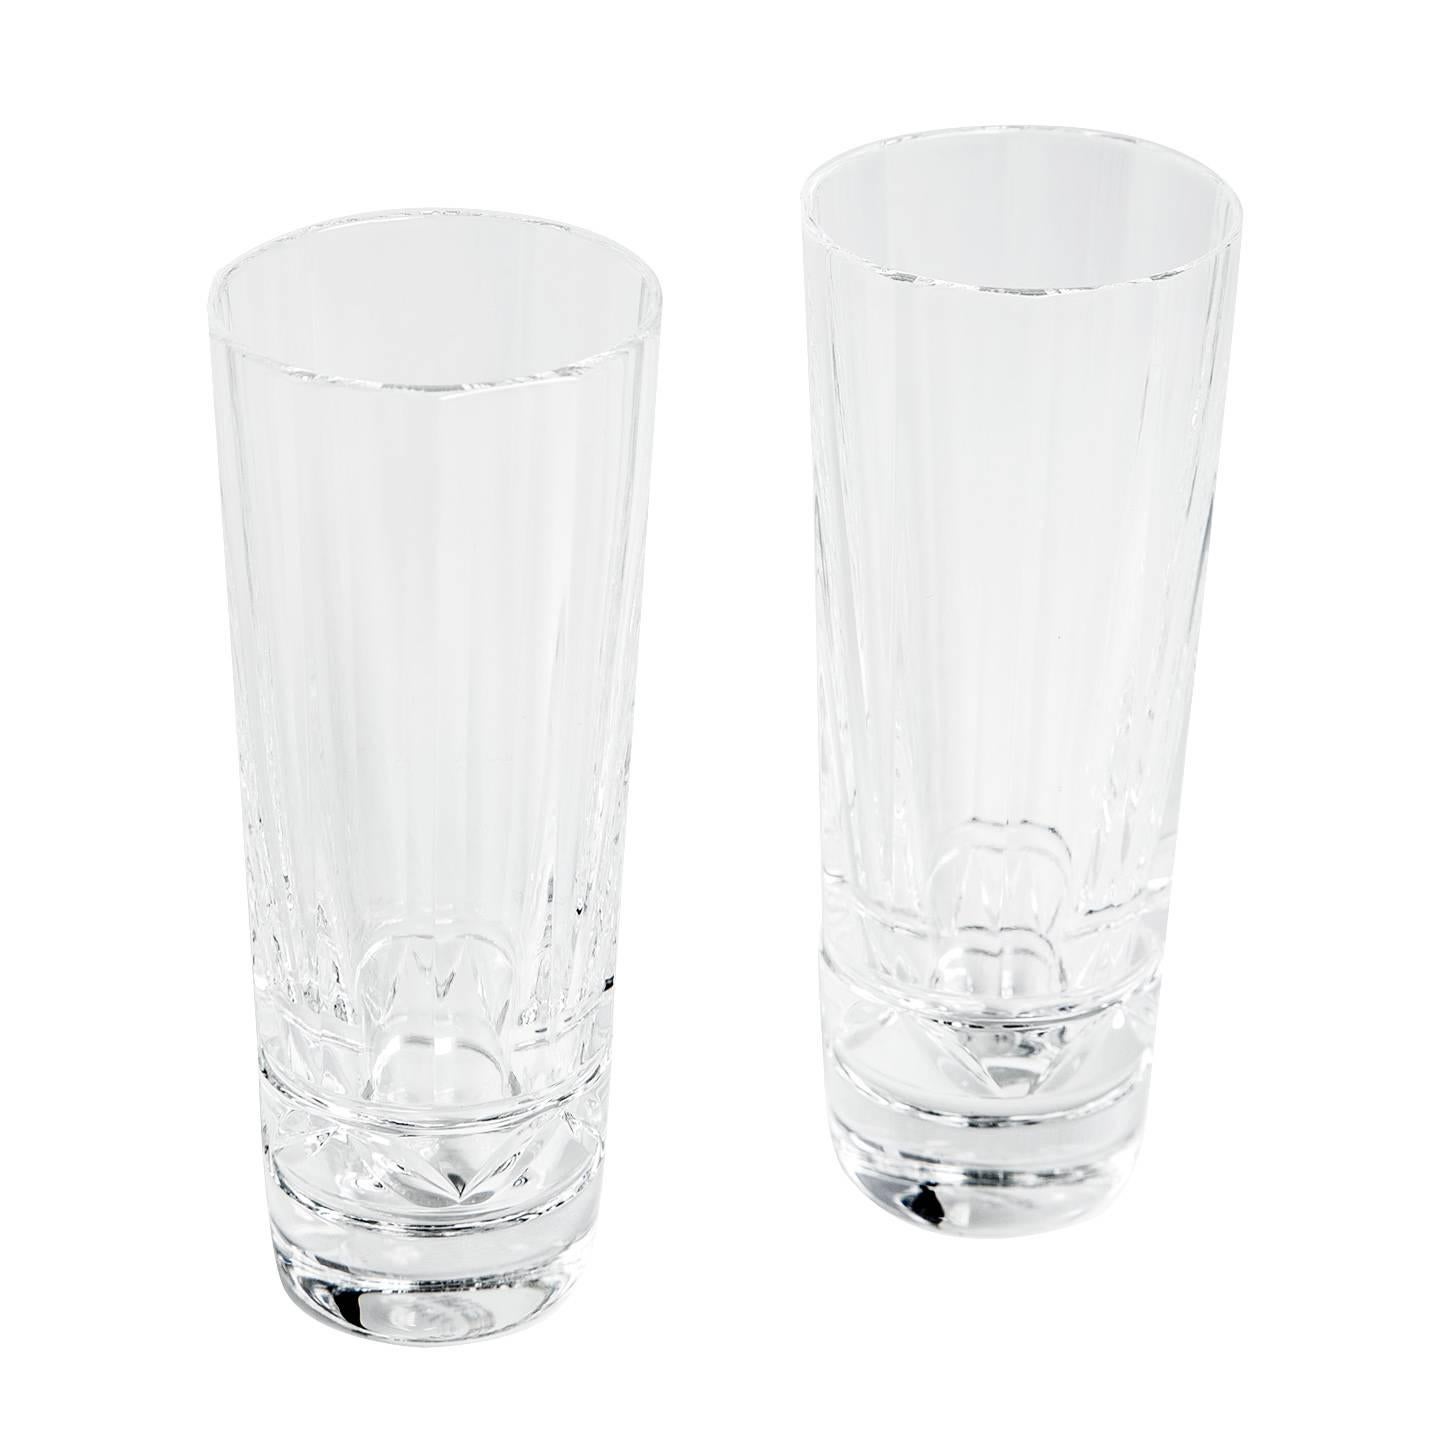 Iskender set of 2 crystal vodka shot glasses crafted entirely by hand then cut to produce smooth facets. The collection combines expertise and modernity, style and delicacy.

Size  H 4” W 1.5”

Condition  Excellent: never used